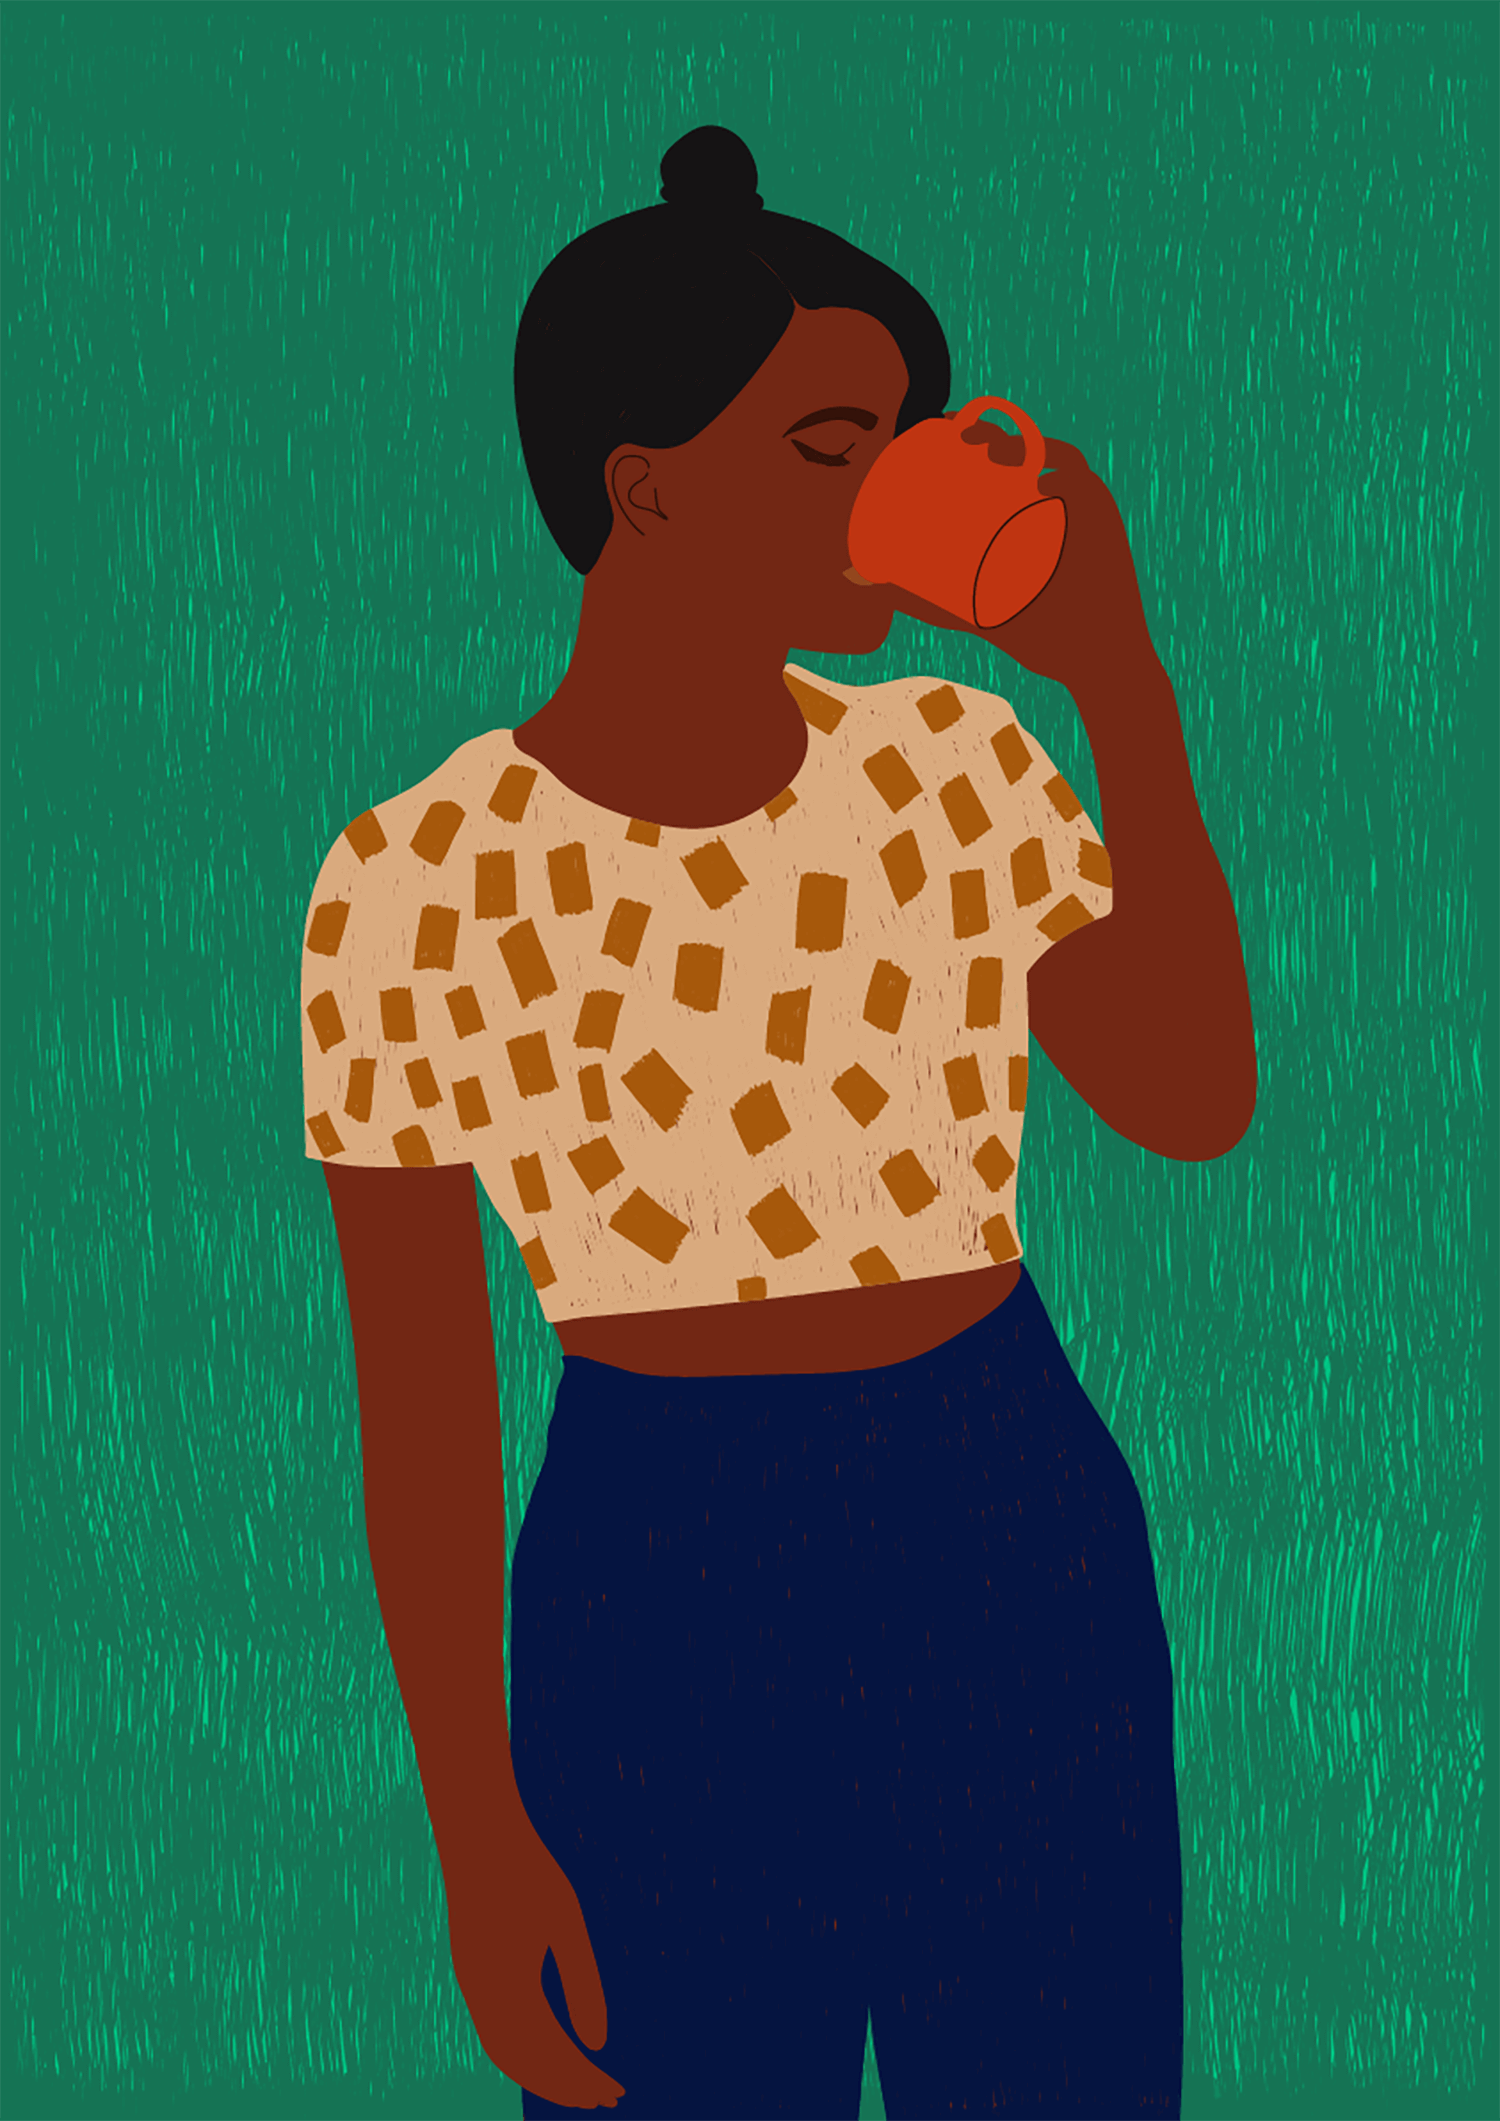 A dark skinned woman drinking a cup of coffee illustration by Kate Phoenix